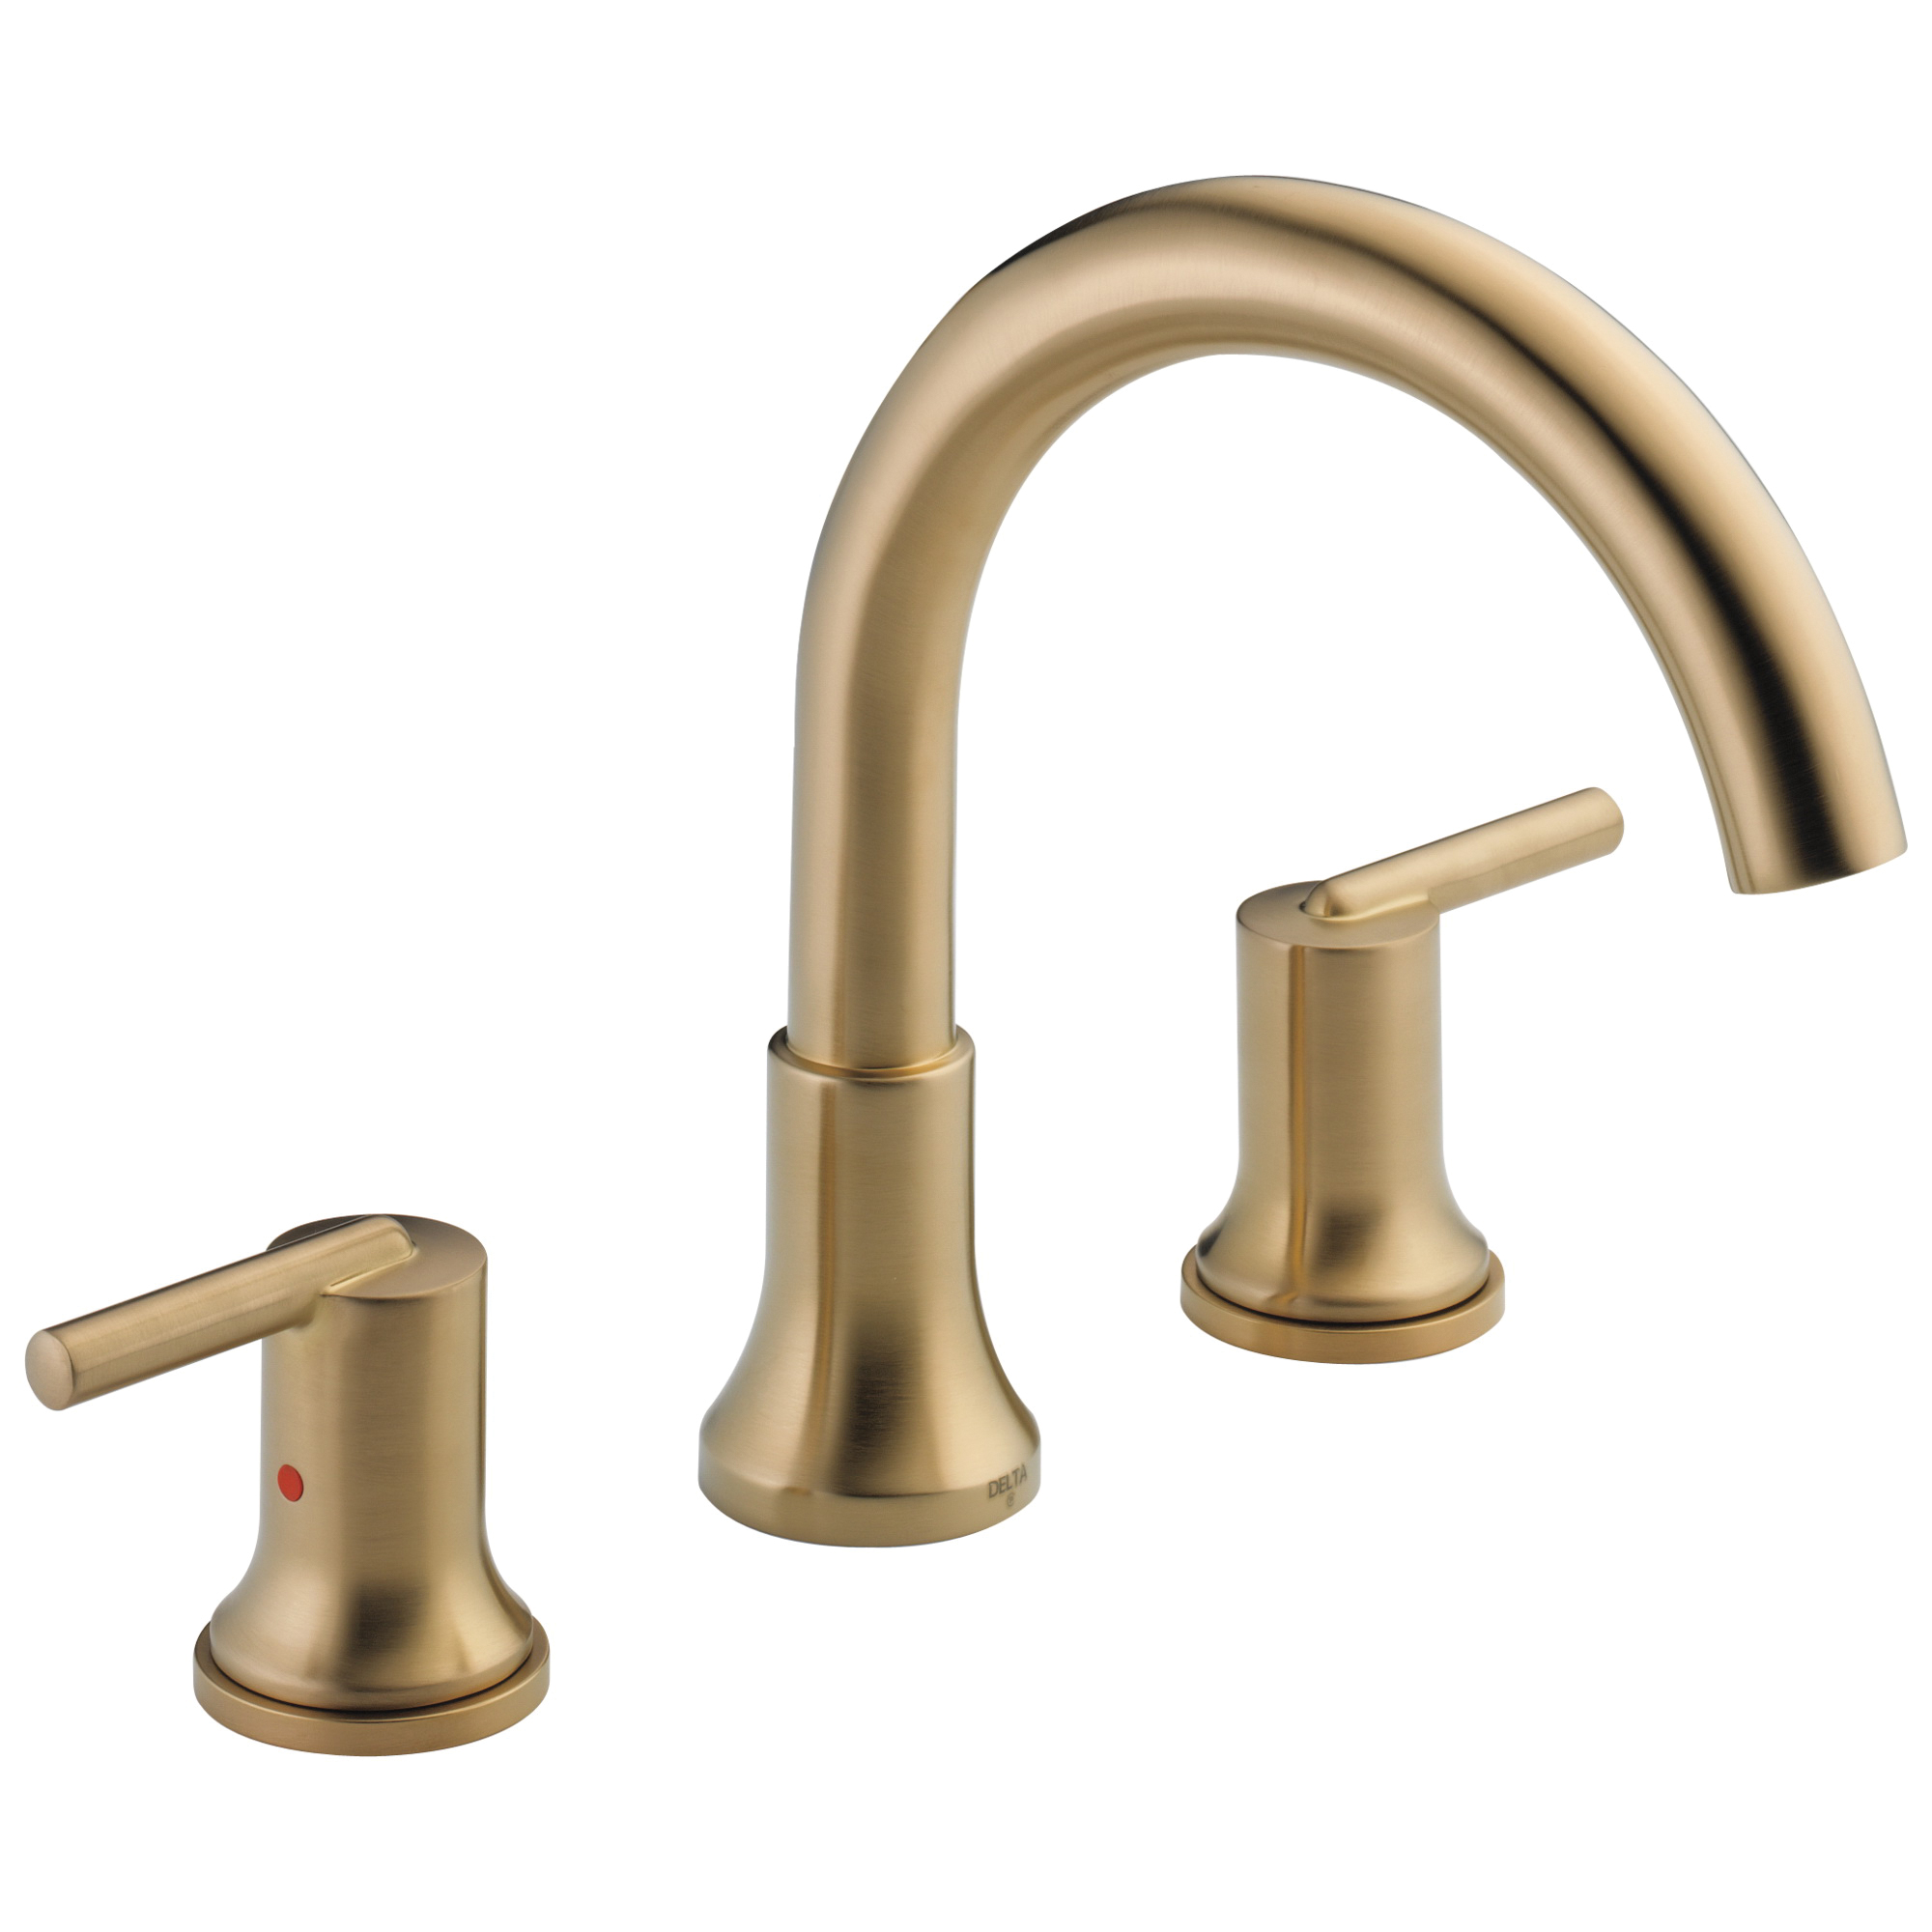 DELTA® T2759-CZ Roman Tub Trim, Trinsic®, 1.75 gpm Flow Rate, 8 to 16 in Center, Champagne Bronze, 2 Handles, Function: Traditional, Domestic